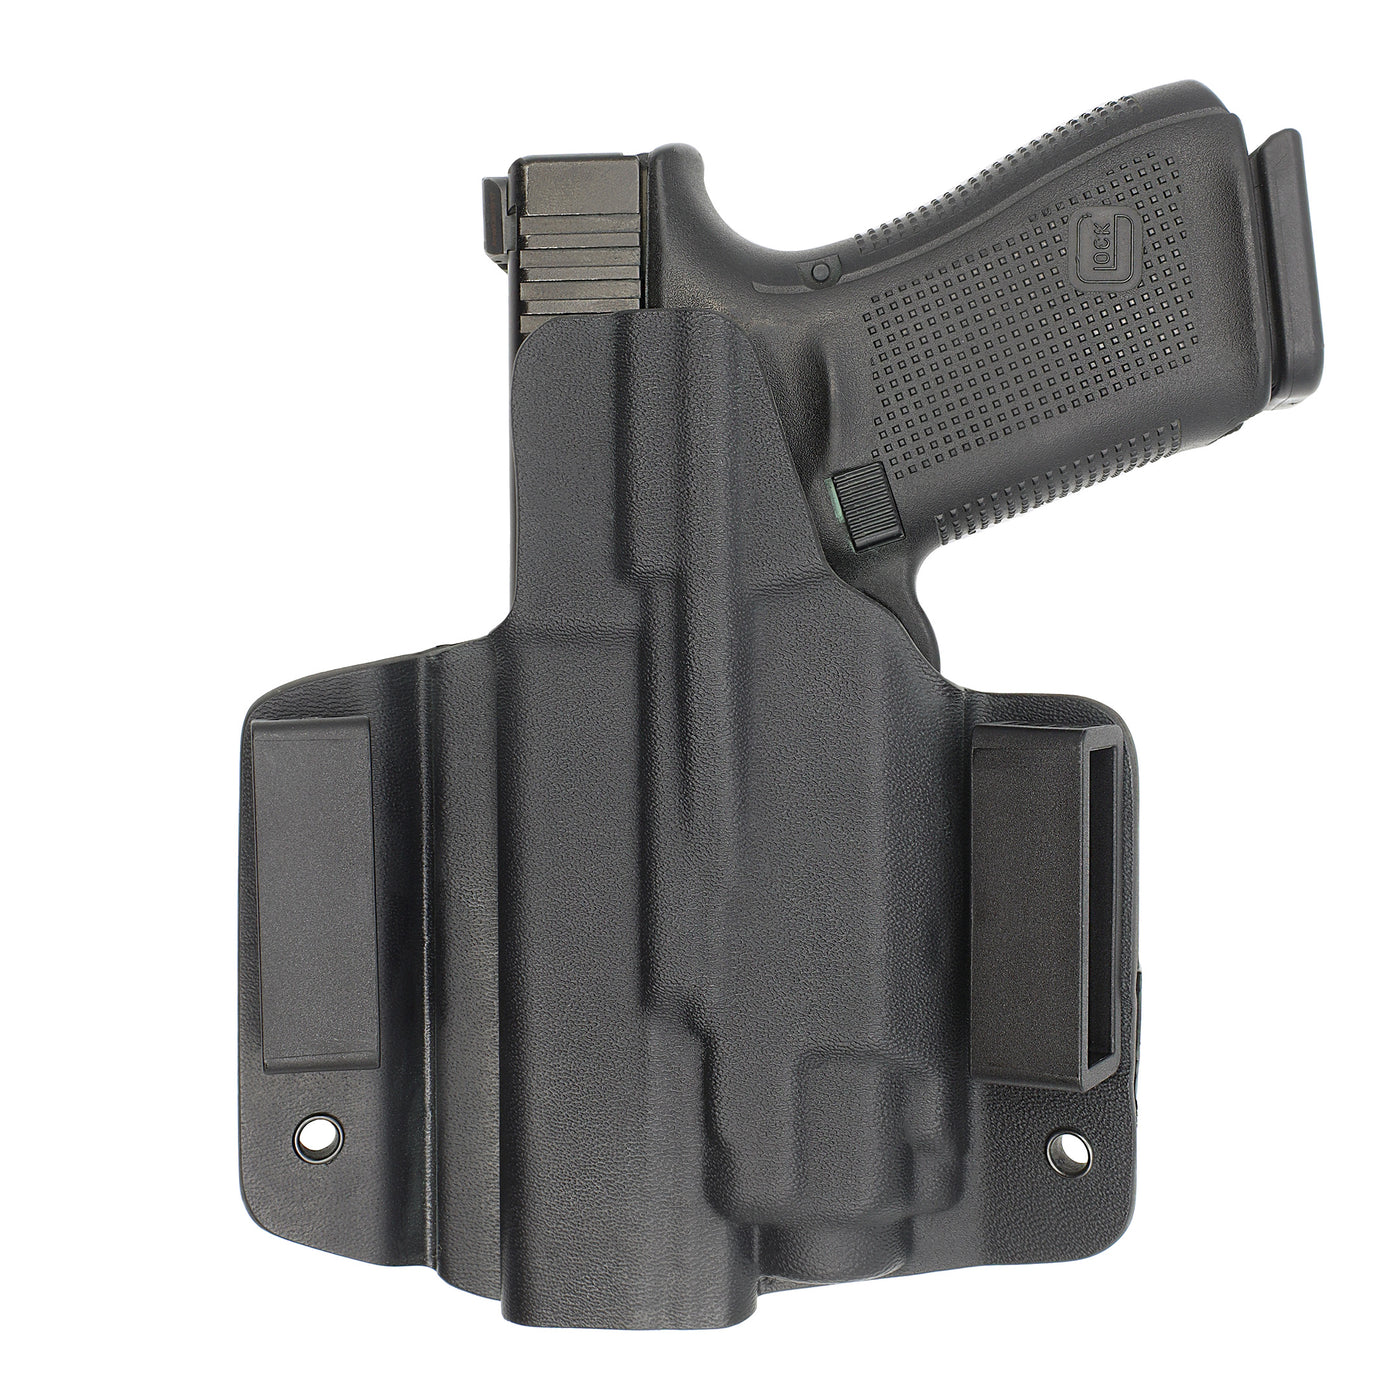 C&G Holsters custom OWB Tactical Shadow Systems Streamlight TLR8 holstered back view